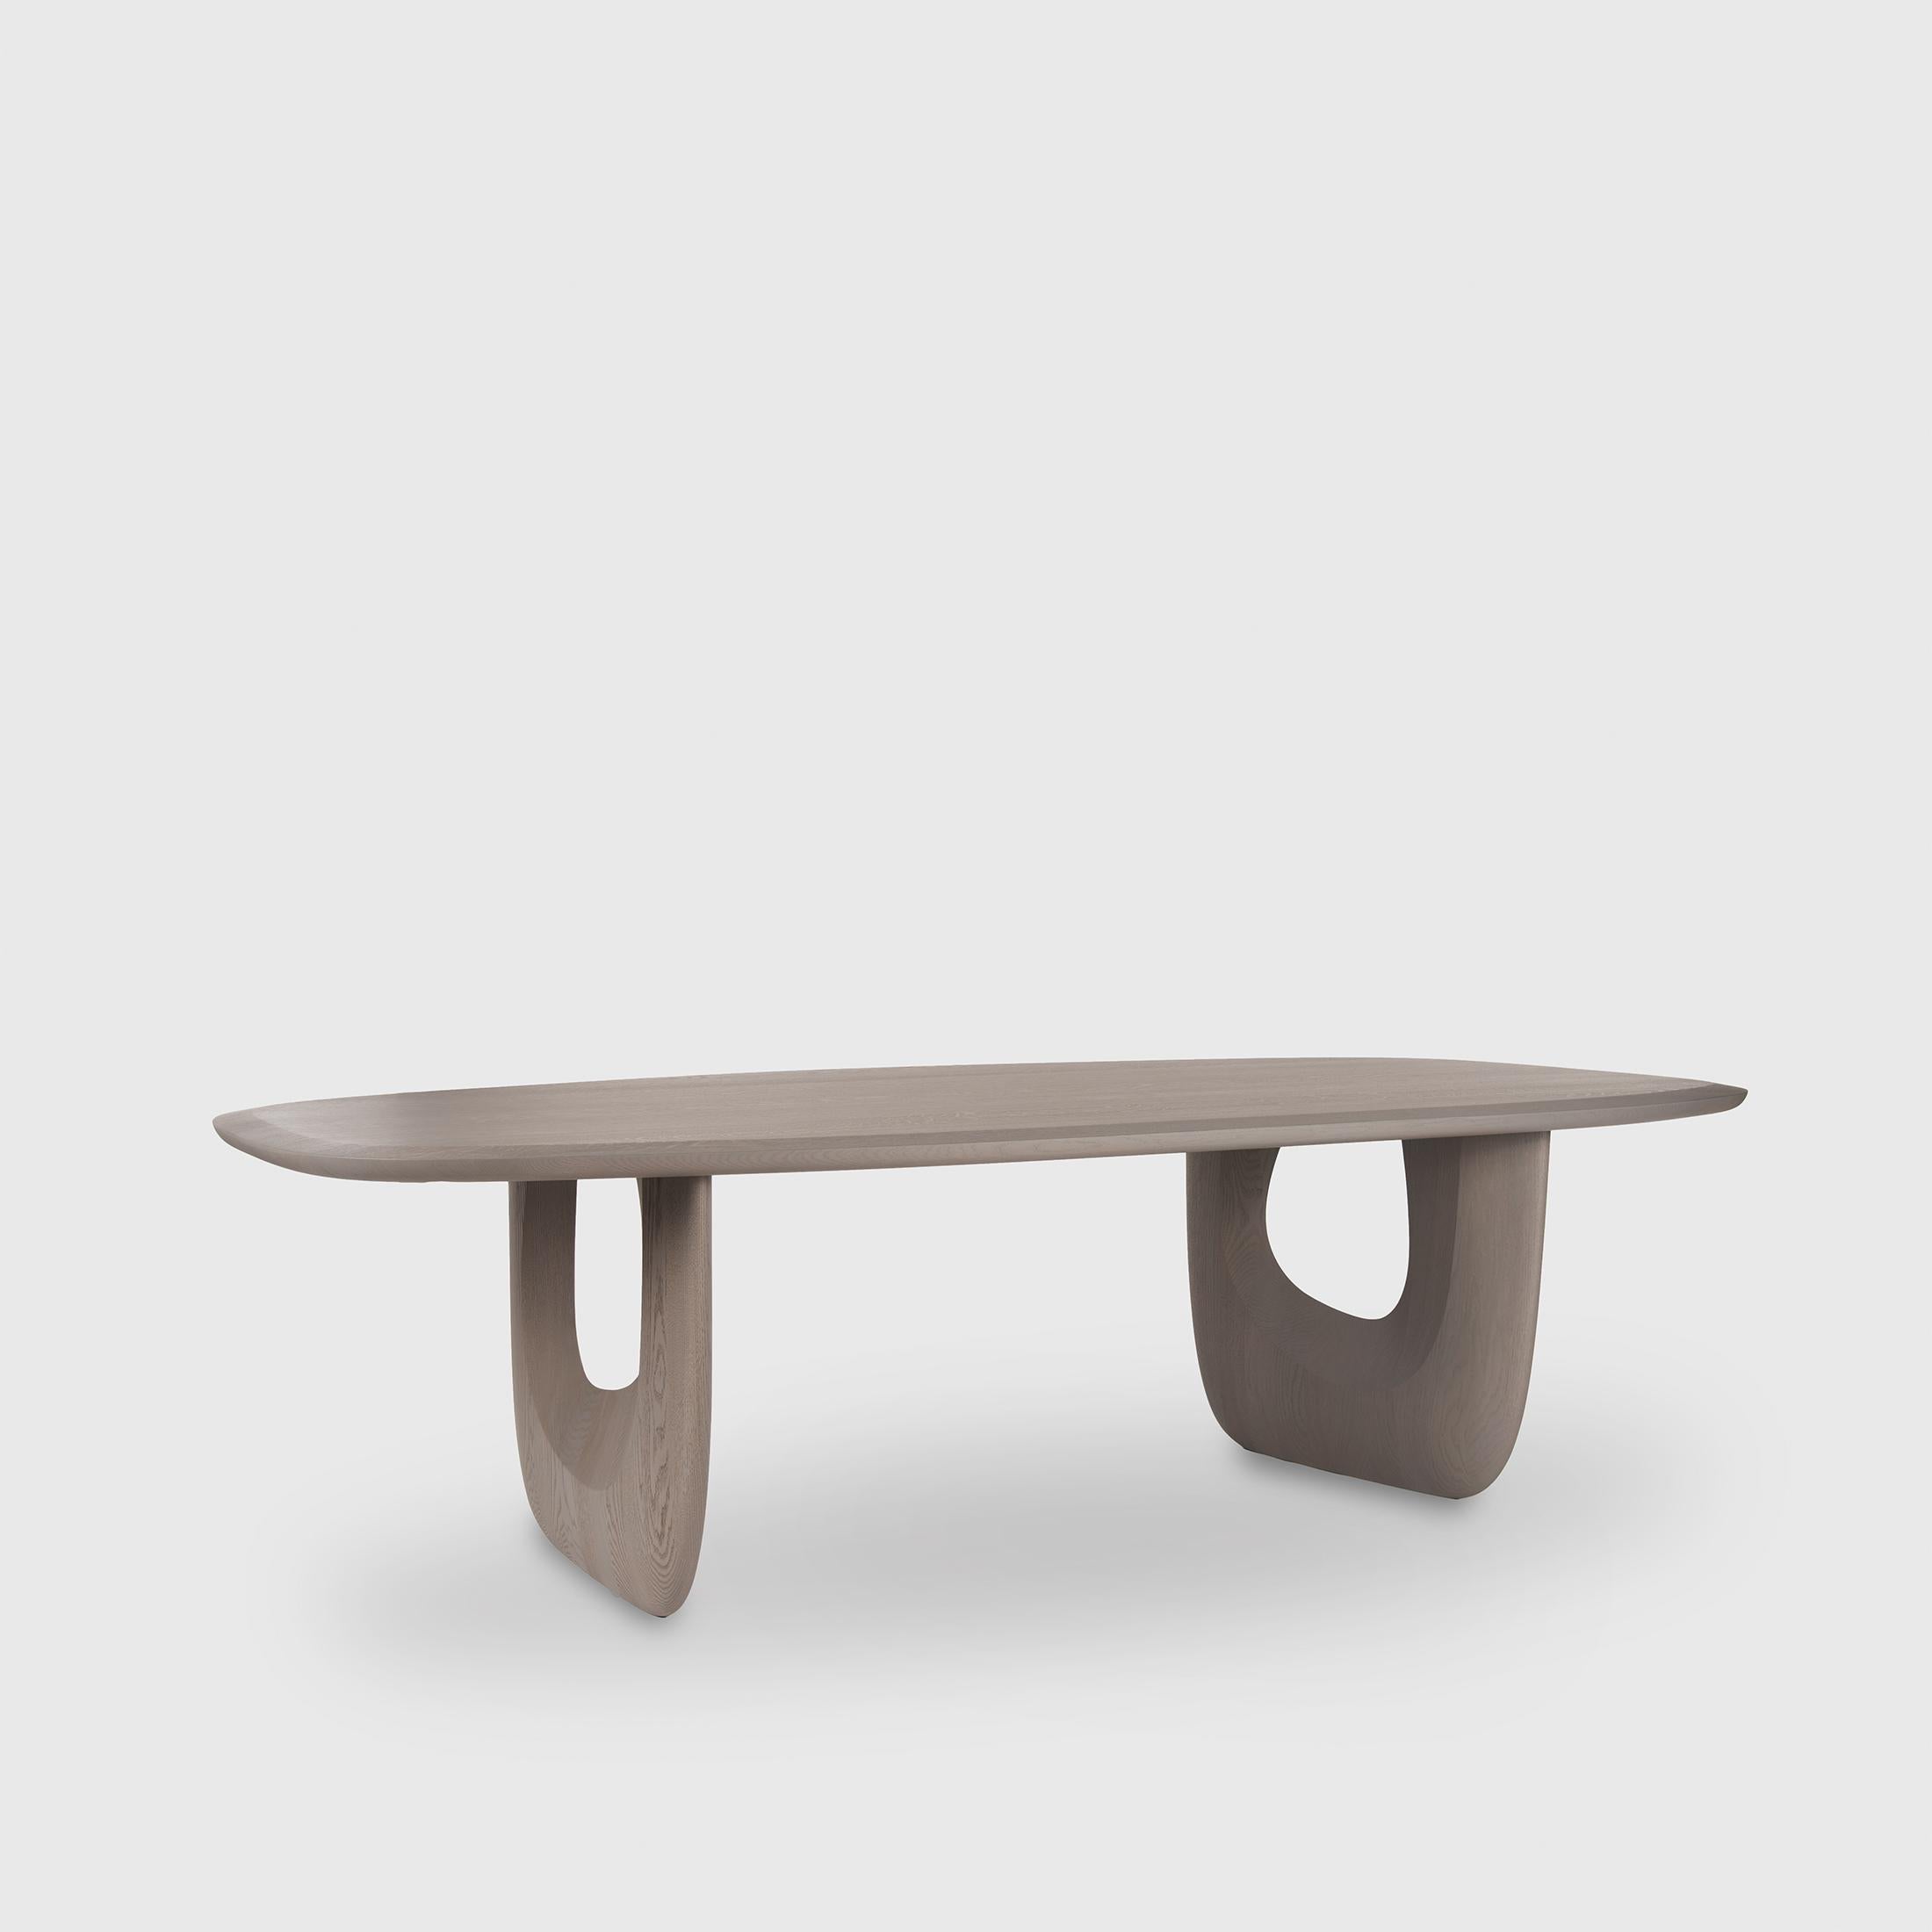 'Savignyplatz' Dining Table by Man of Parts
Signed by Sebastian Herkner 

Solid oak wood 

Finishes available: 
- Black 
- Mist
- Ivory
- Nude 
- Whiskey

Dimensions available:
Widths from 220 to 500cm by 20cm increments

Model shown: Mist oak, H.